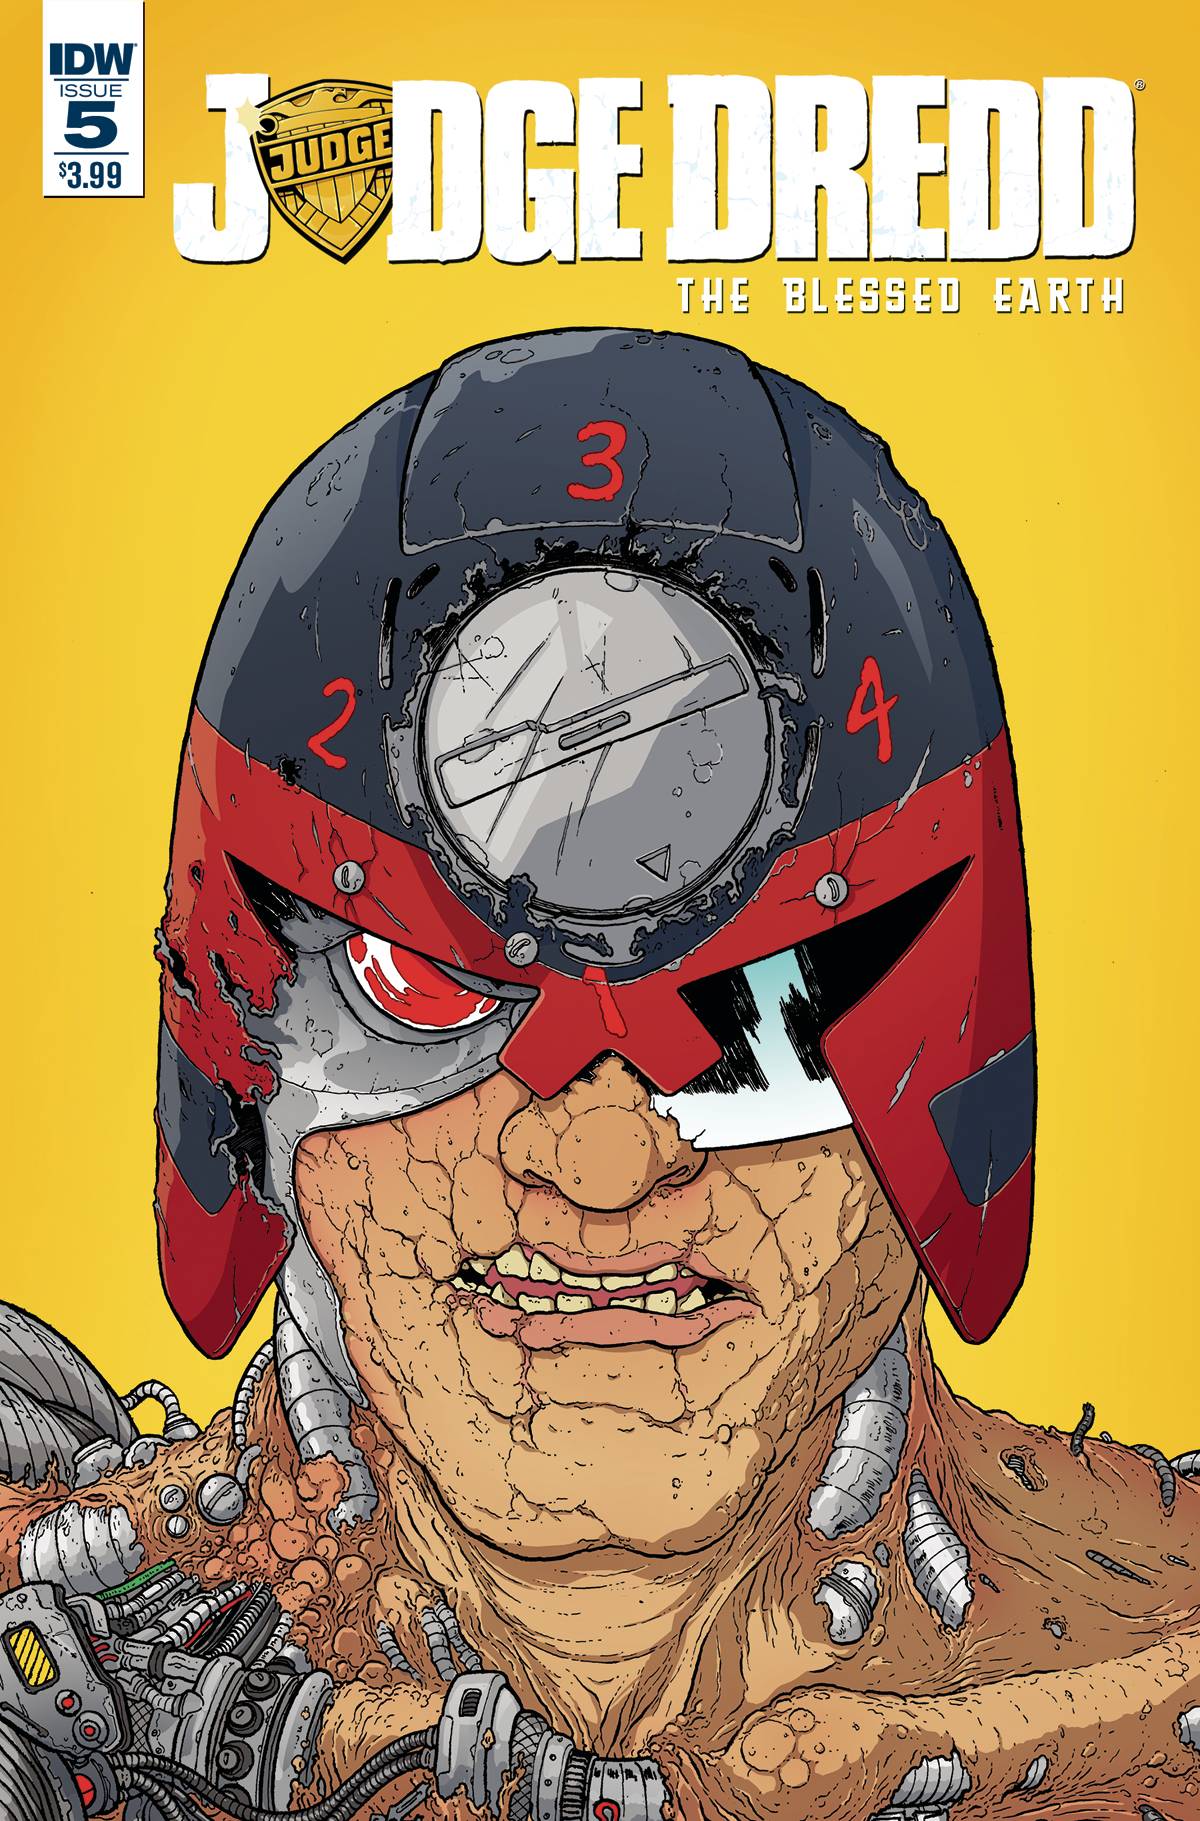 JUDGE DREDD: THE BLESSED EARTH#5